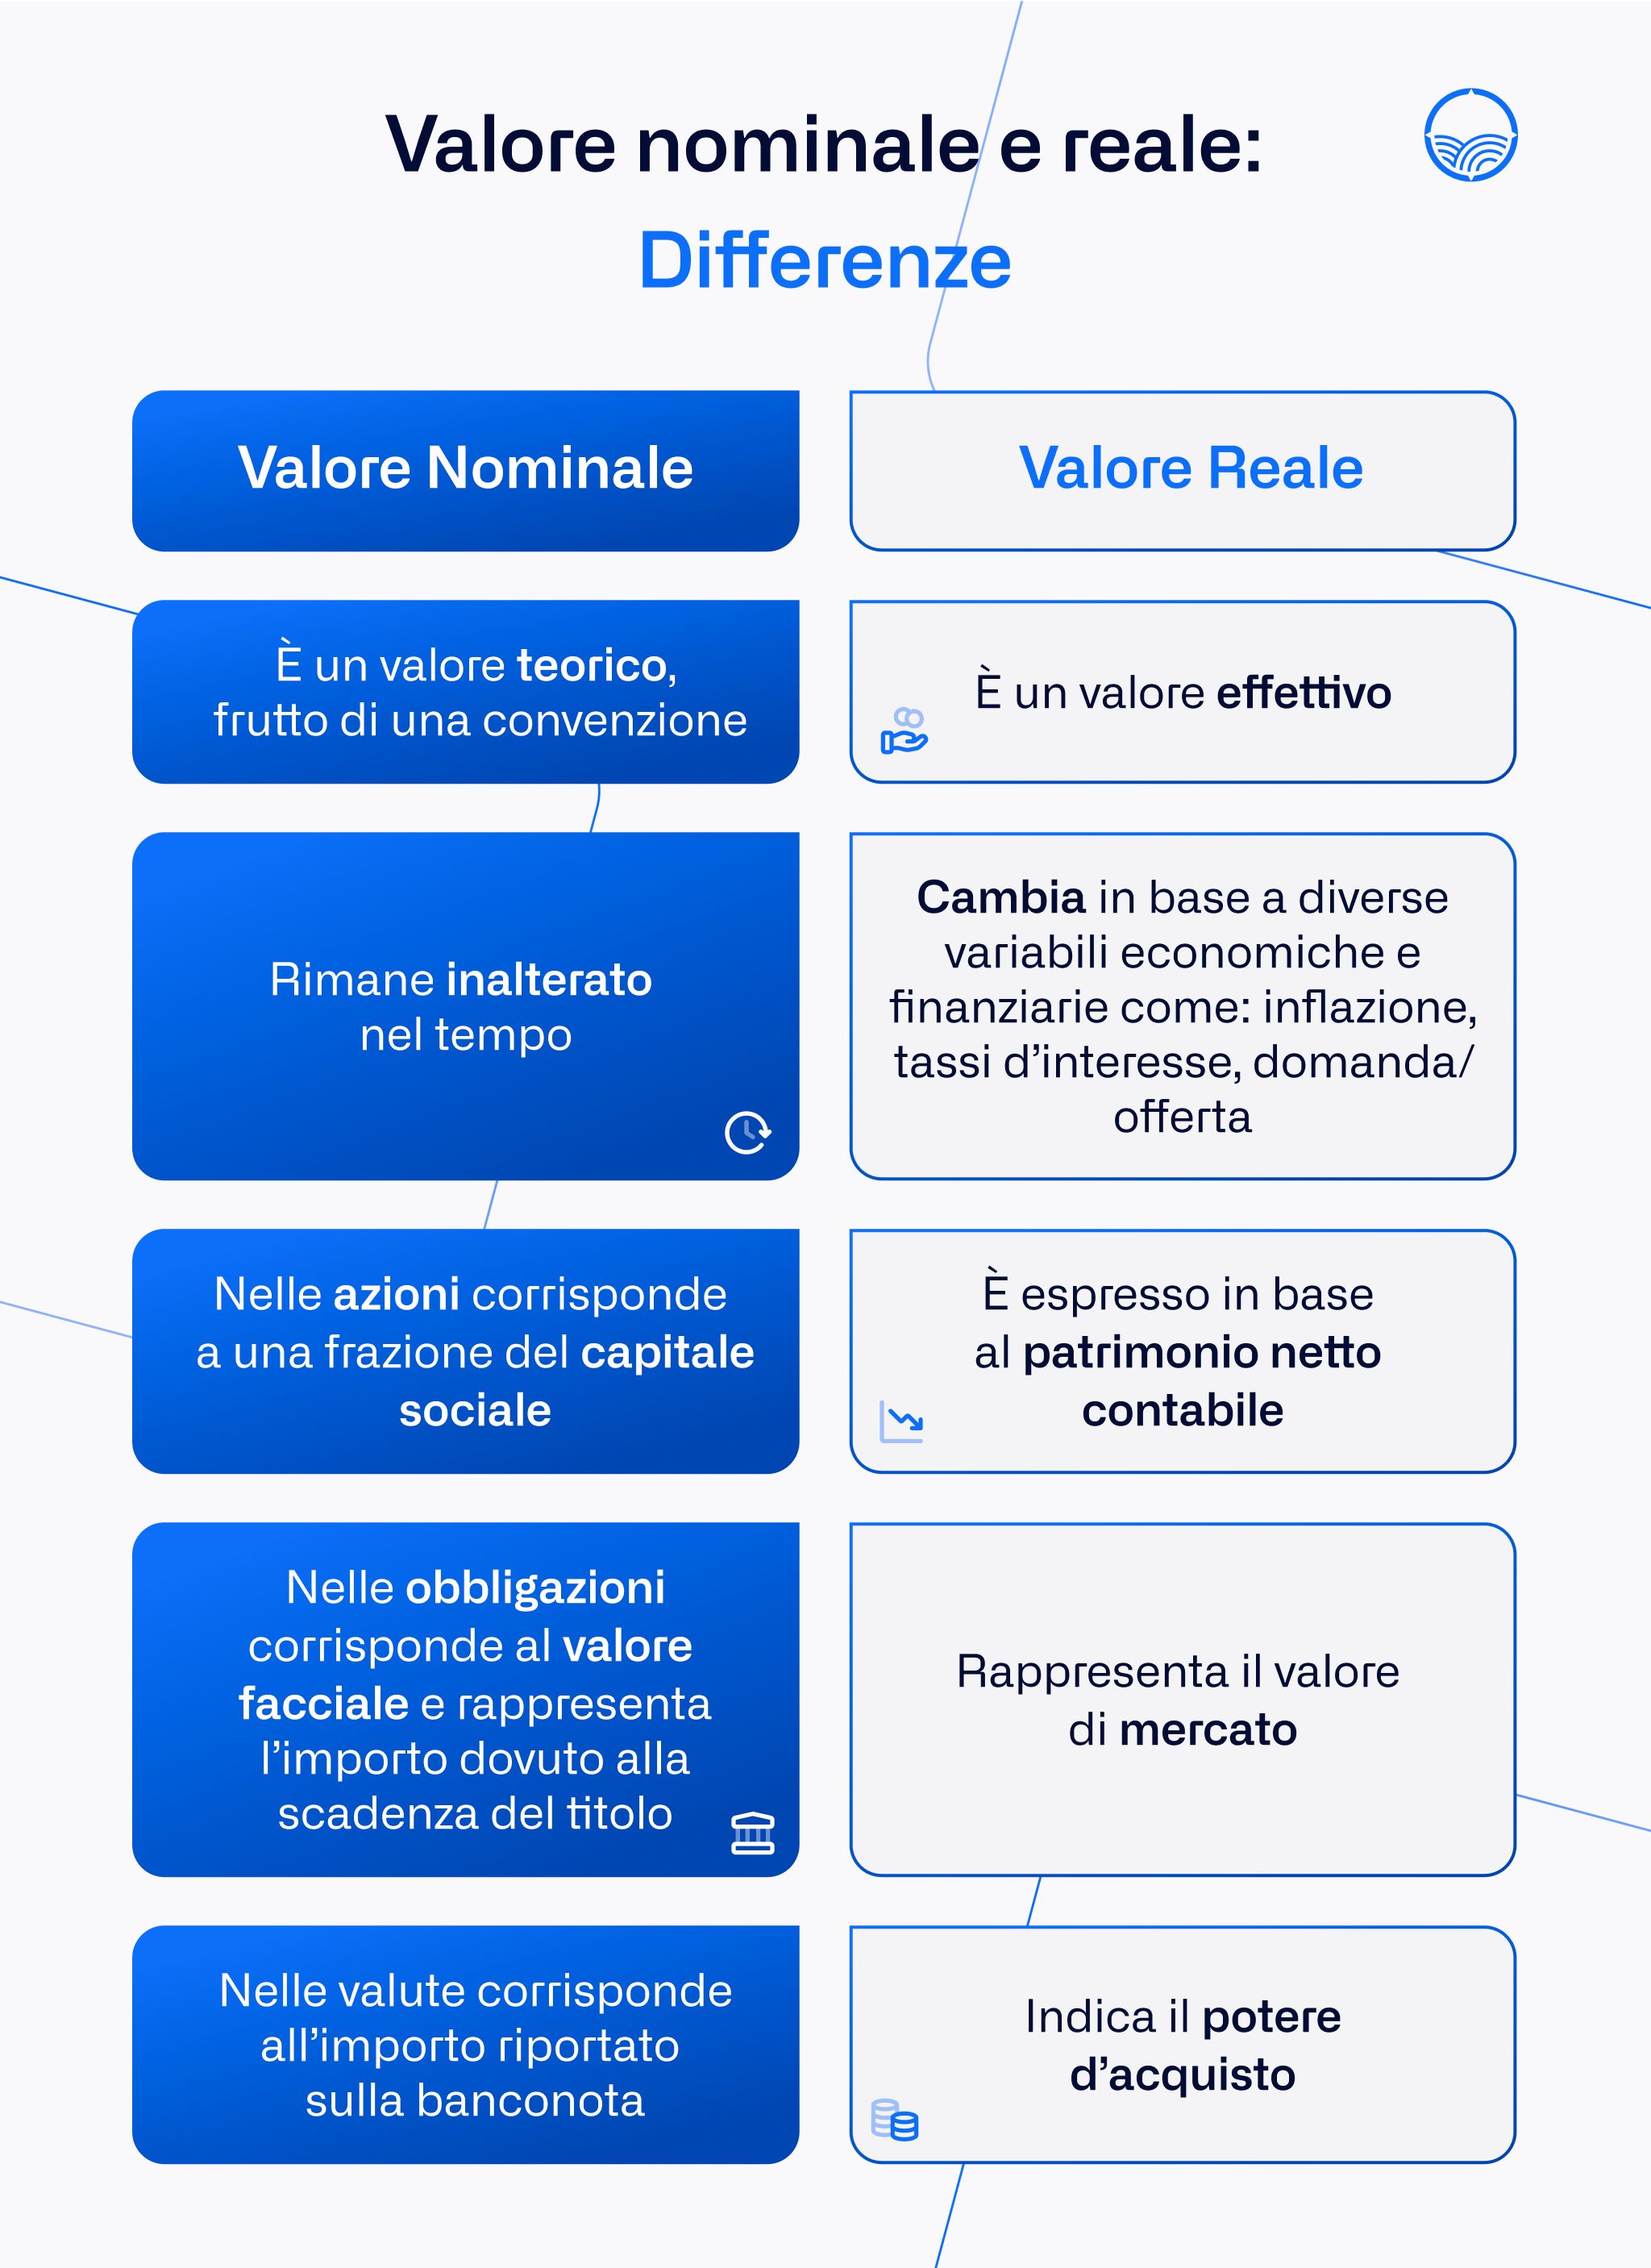 Nominal value and real value differences